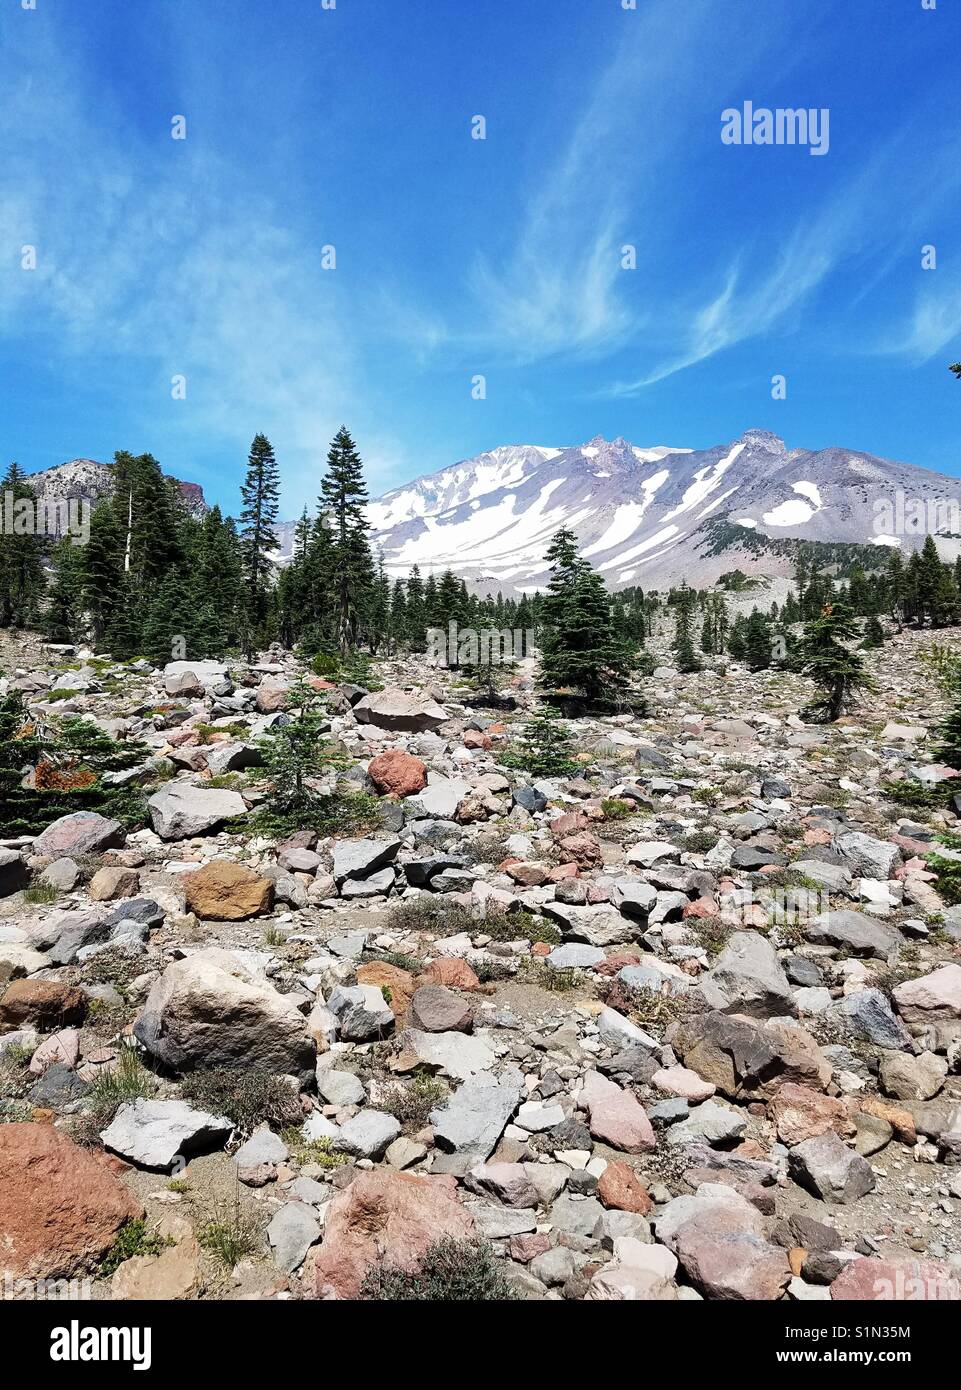 Approaching the summit of mysterious Mount Shasta, this vertical format features a large rock scree field in the foreground. Stock Photo